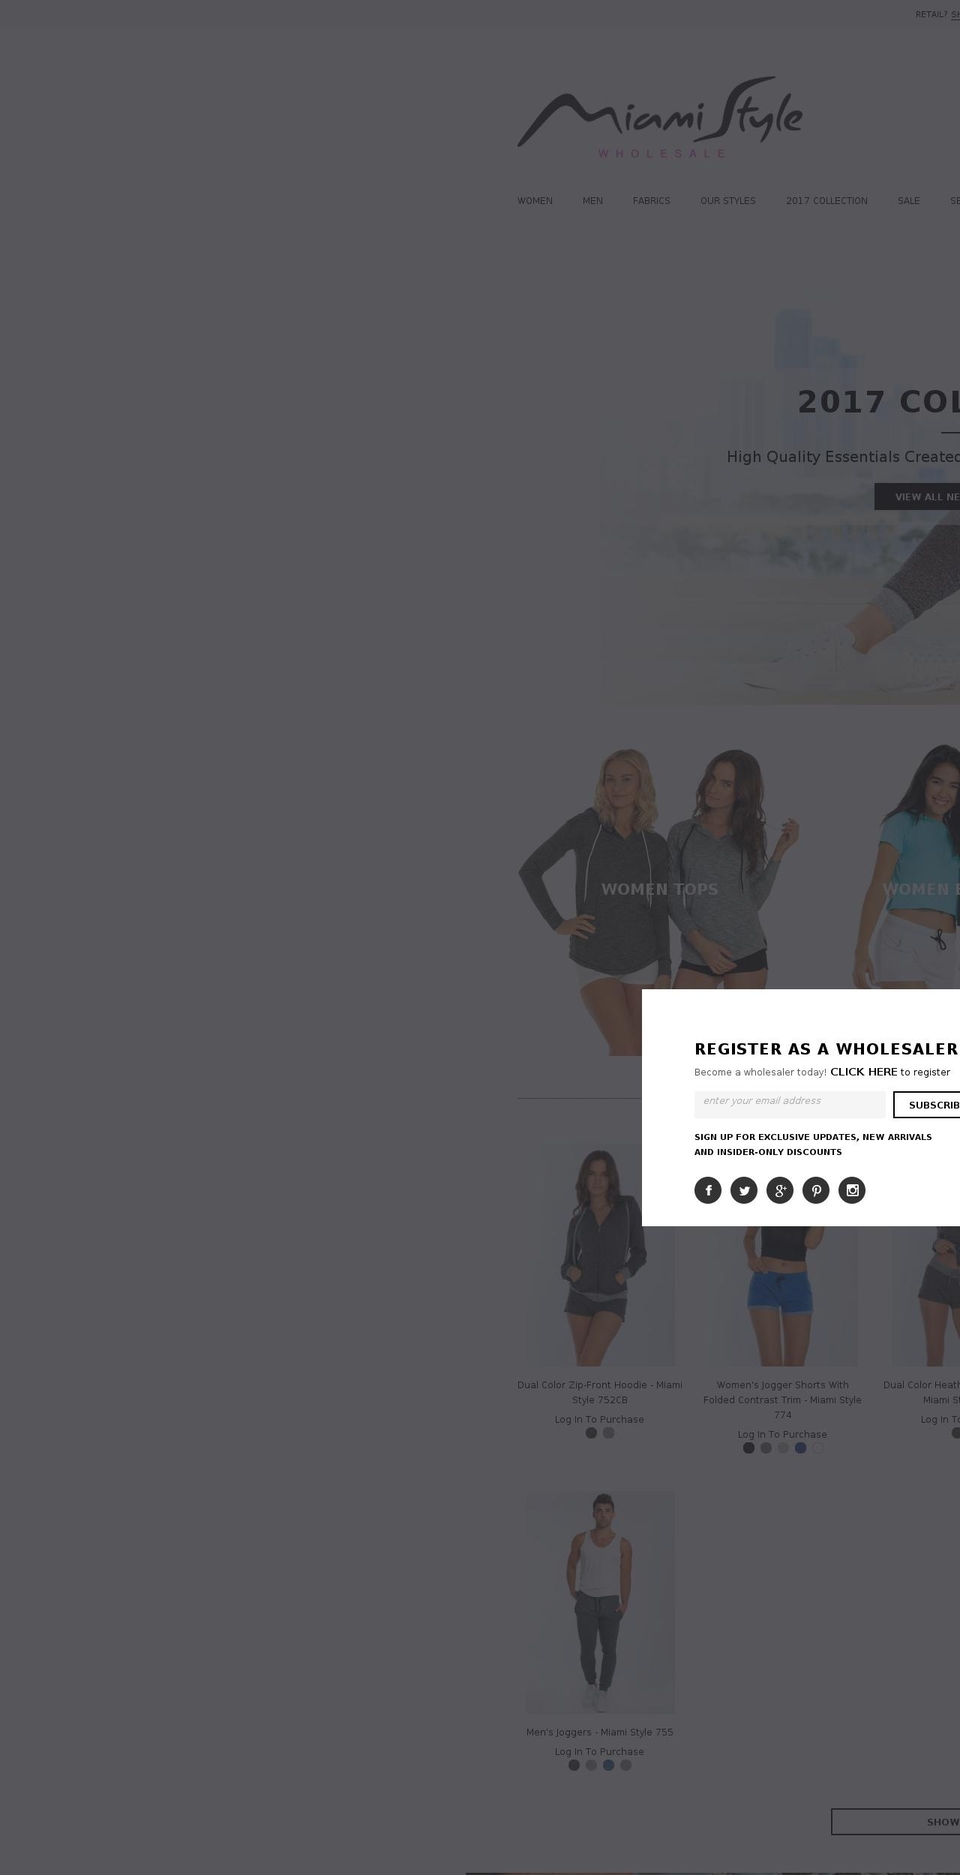 Copy of Shopify theme site example miamistylebsd.com